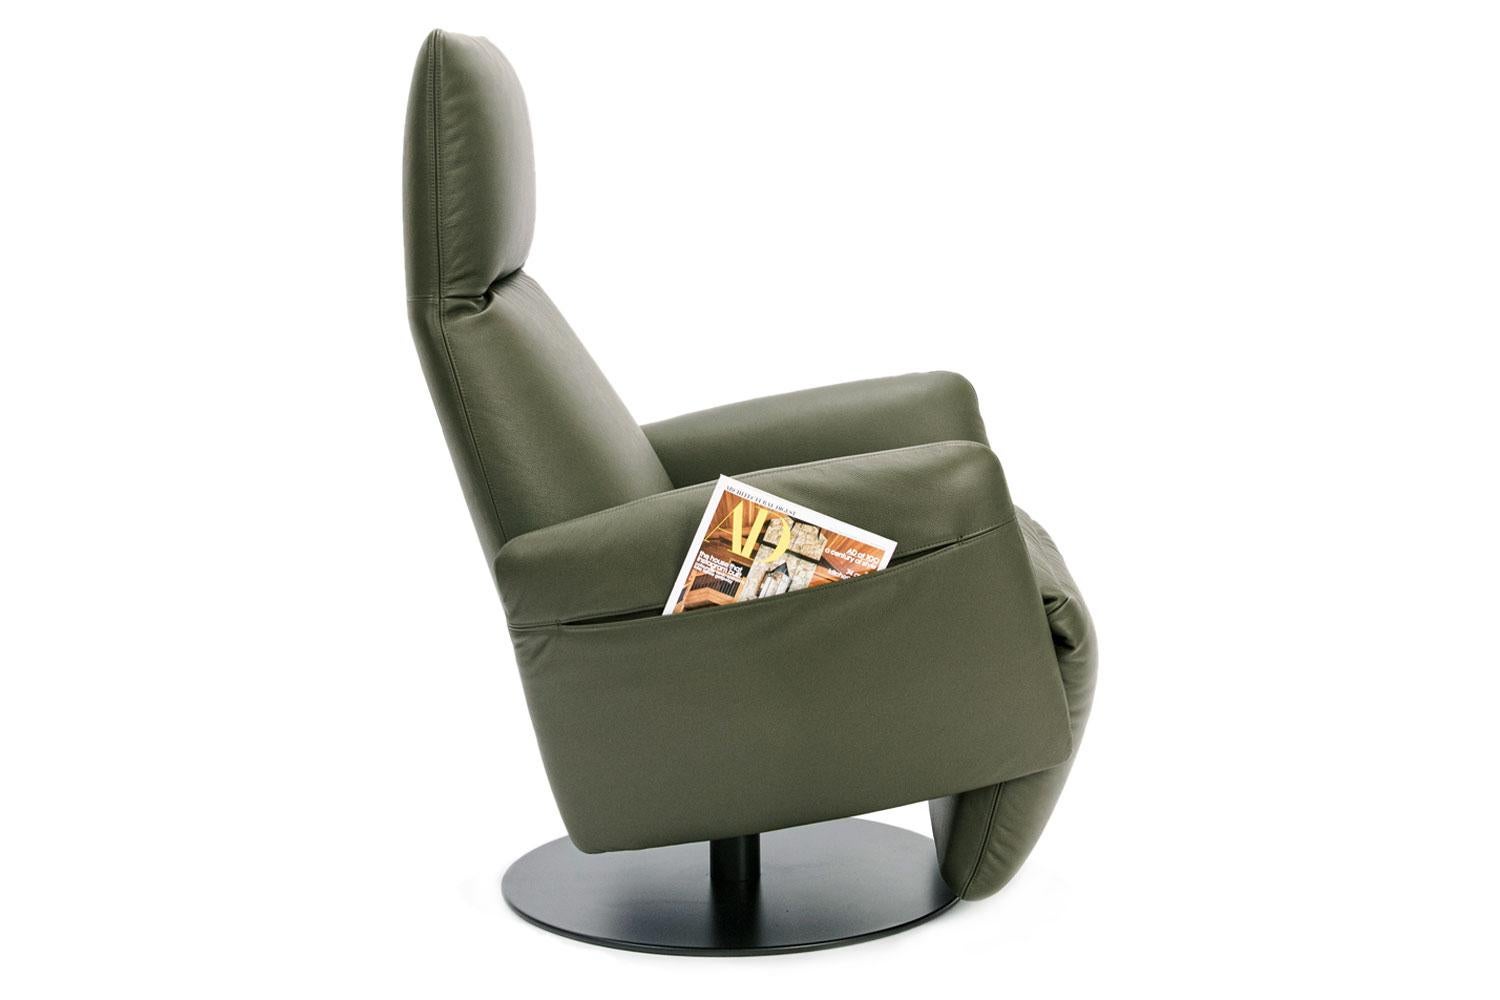 Modern Italian Olive Colored Leather Upholstered Recliner, Poltrona Frau